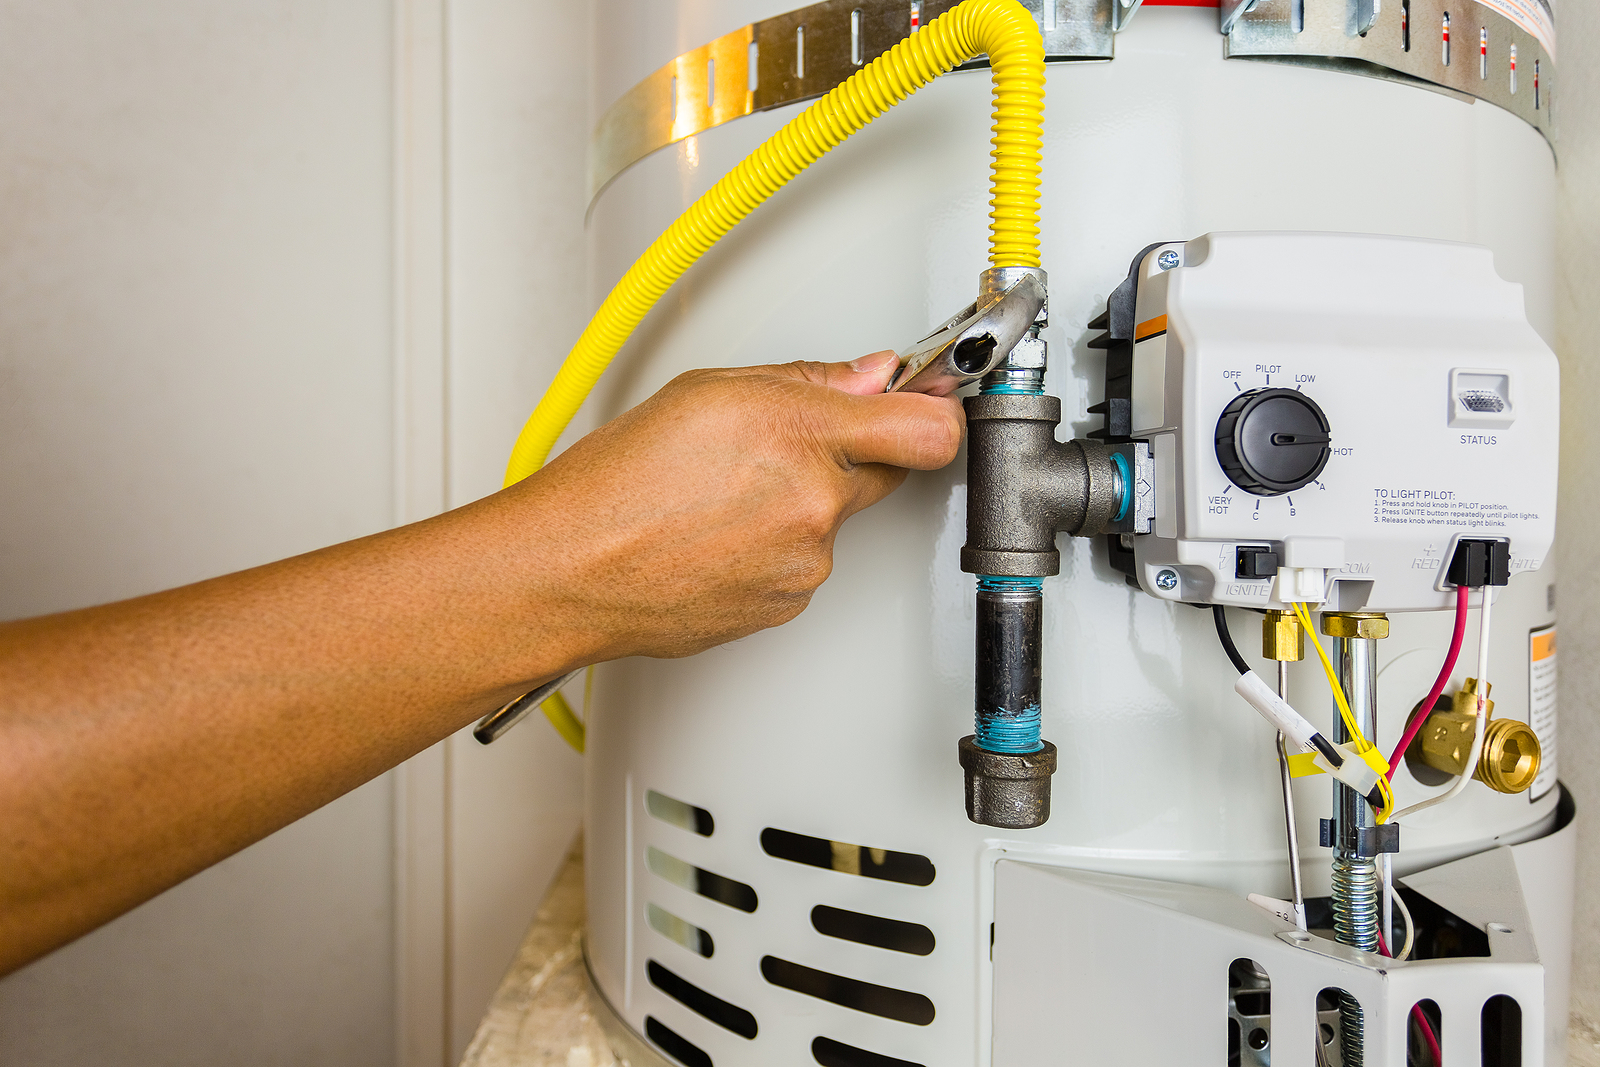 Why Is My Electric Water Heater Tripping My Circuit Breaker?